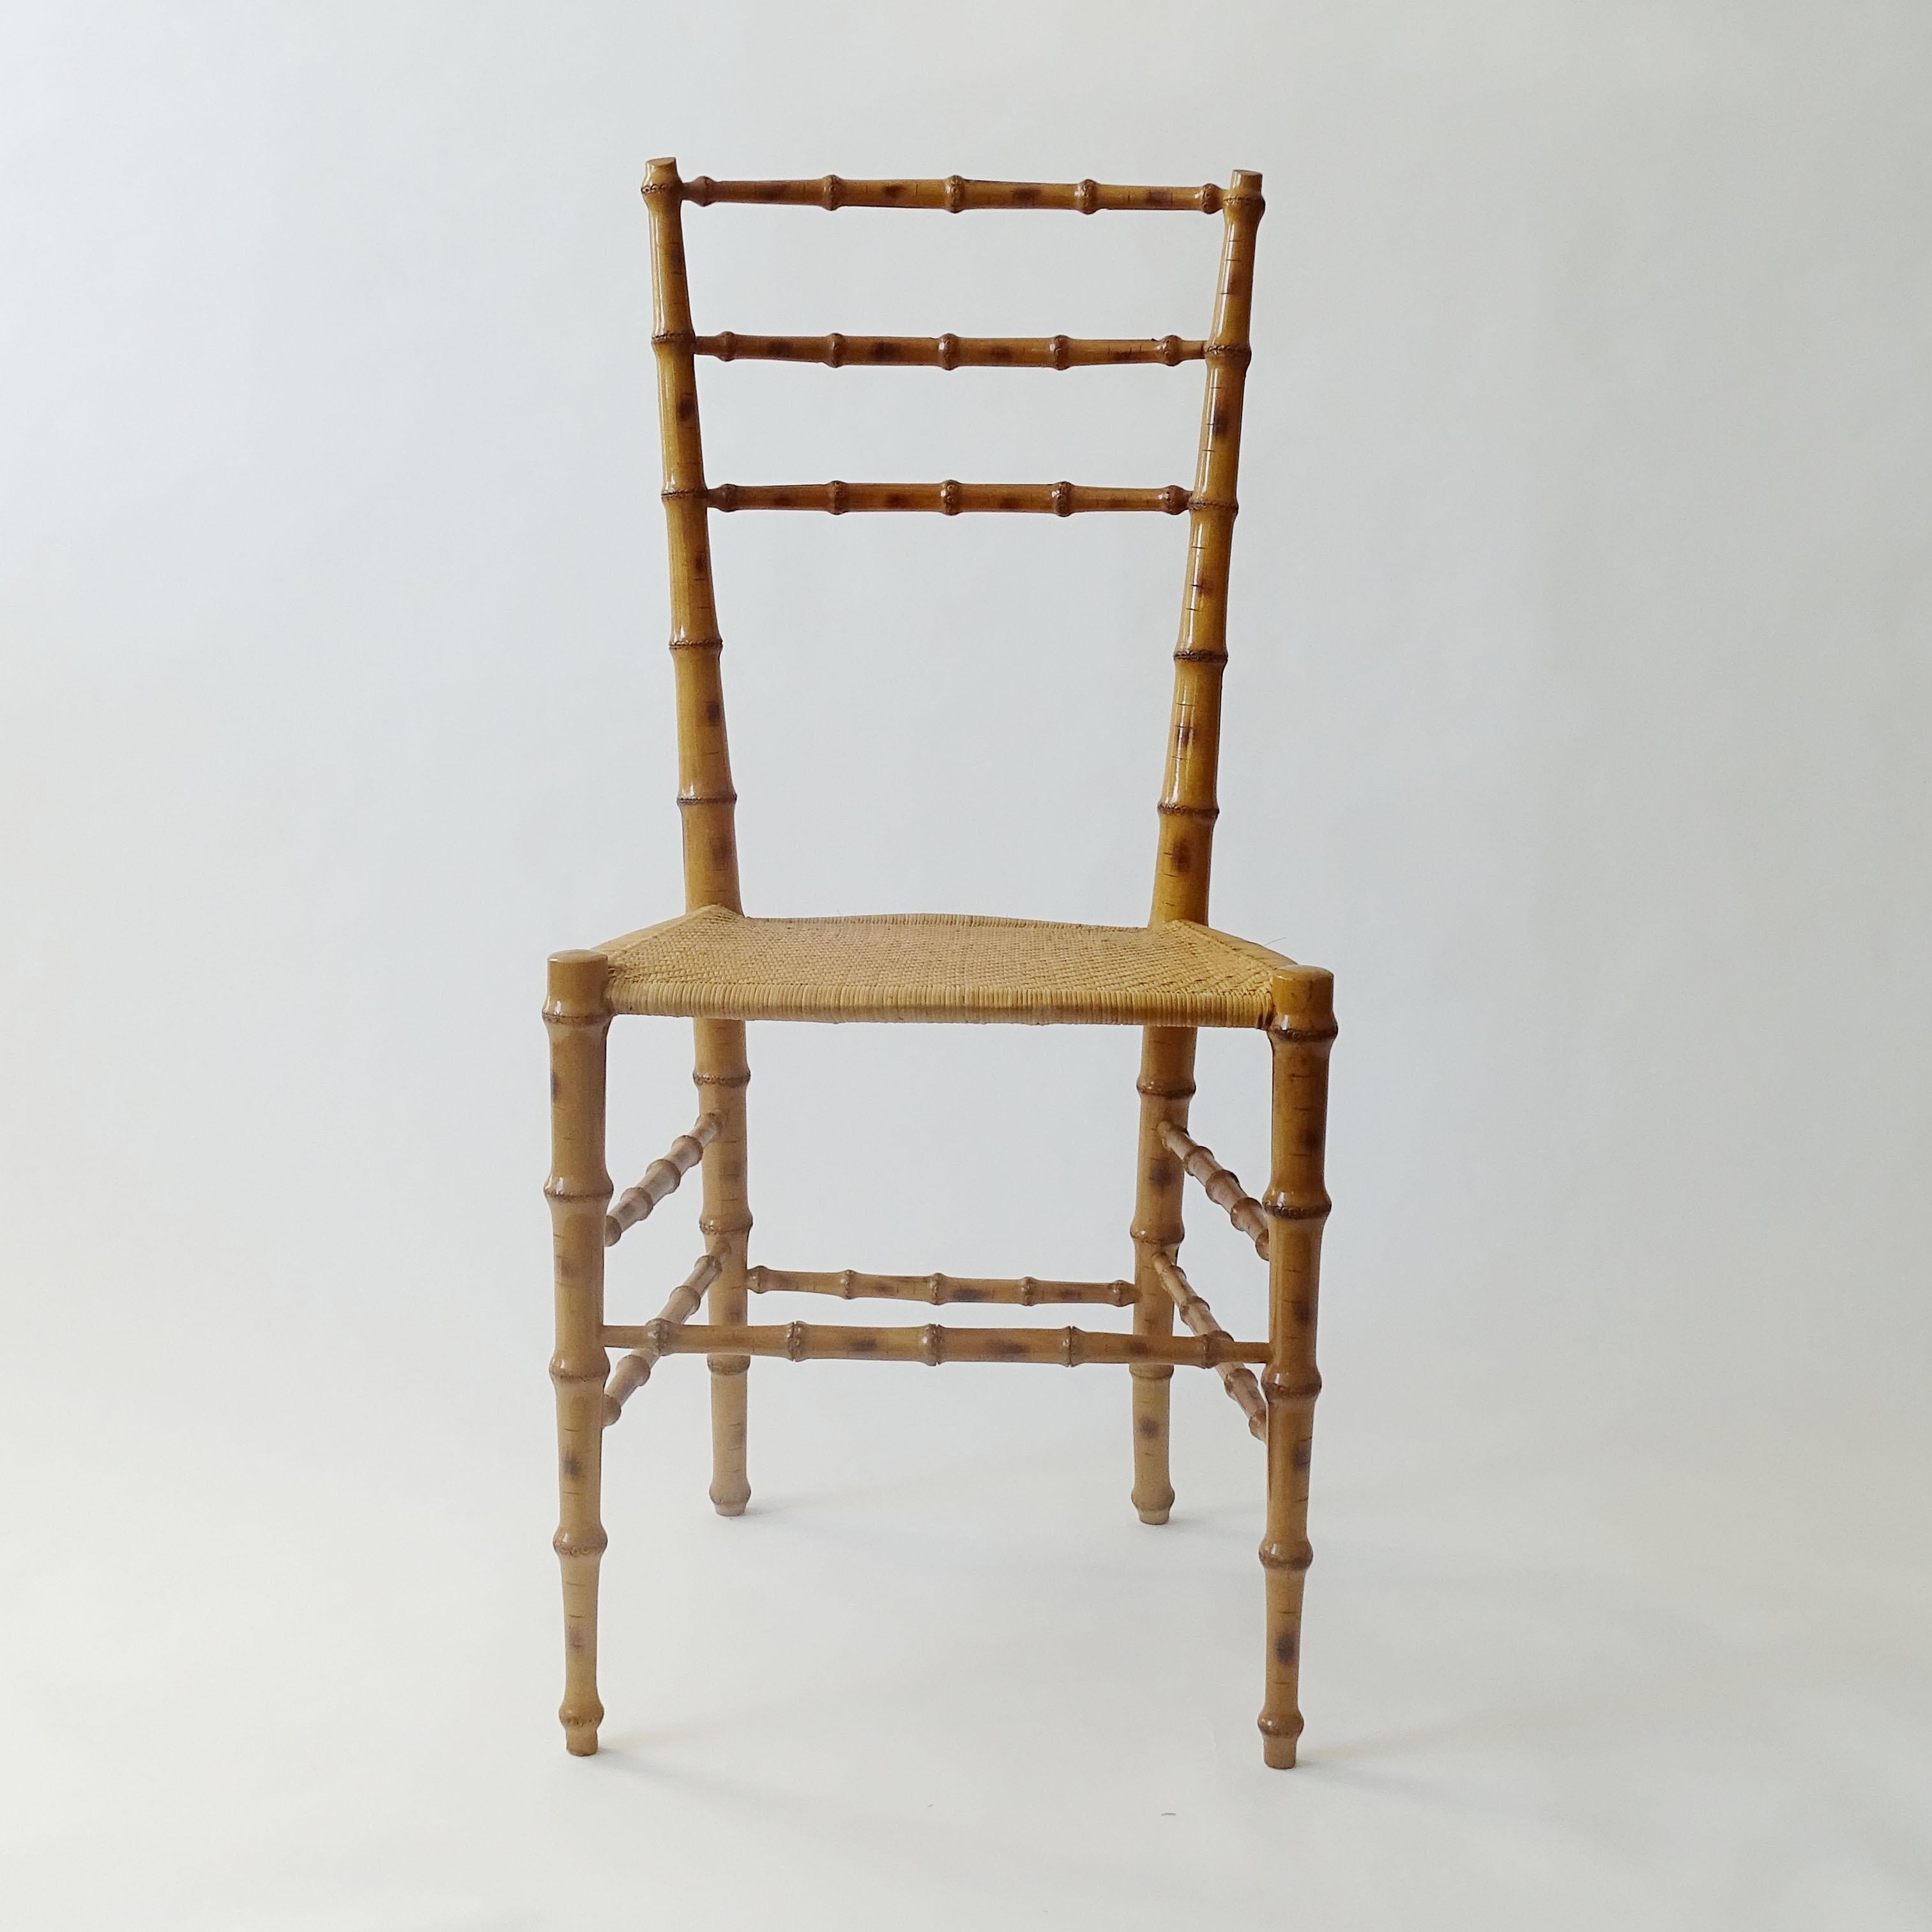 Splendid set of Six Faux Bamboo Chiavarina Chairs, Italy 1950s For Sale 1